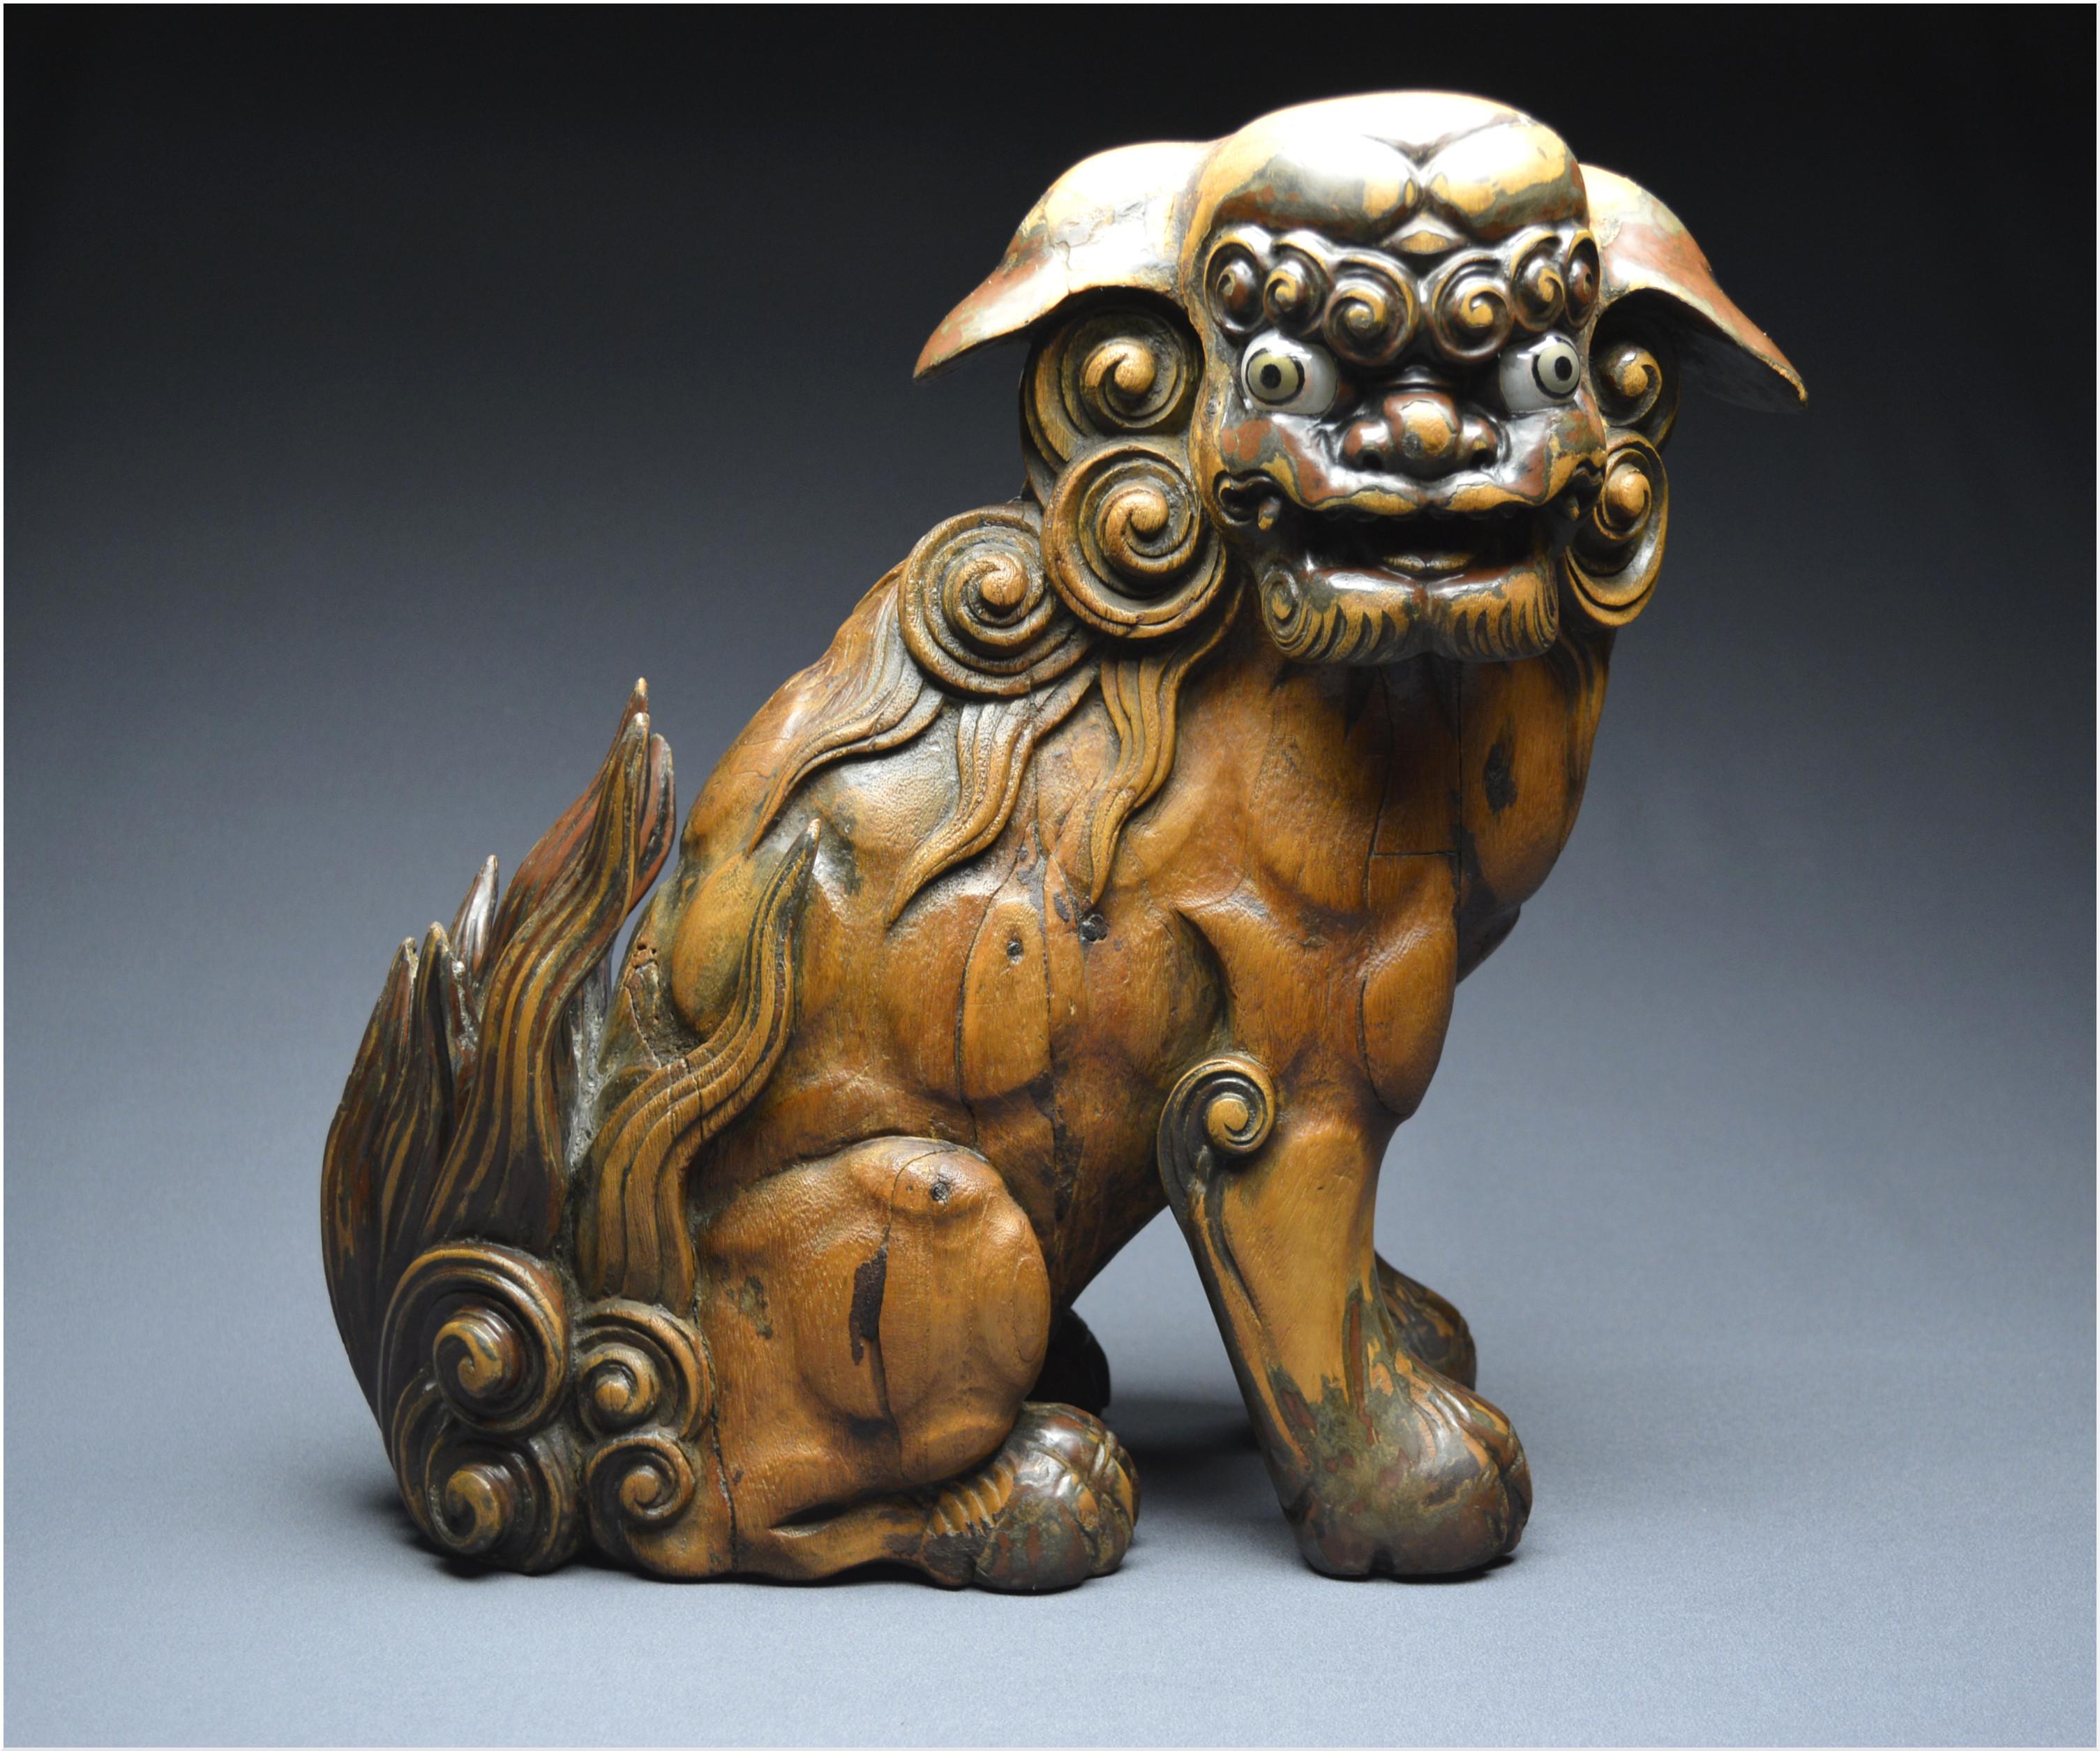 Japan
Edo period (1603 – 1867) / 19th century

Guardian lion represented seated, head turned to the right, it has a massive body with powerful chest and legs, thus expressing great strength. The mane and tail are treated in large swirling wisps and